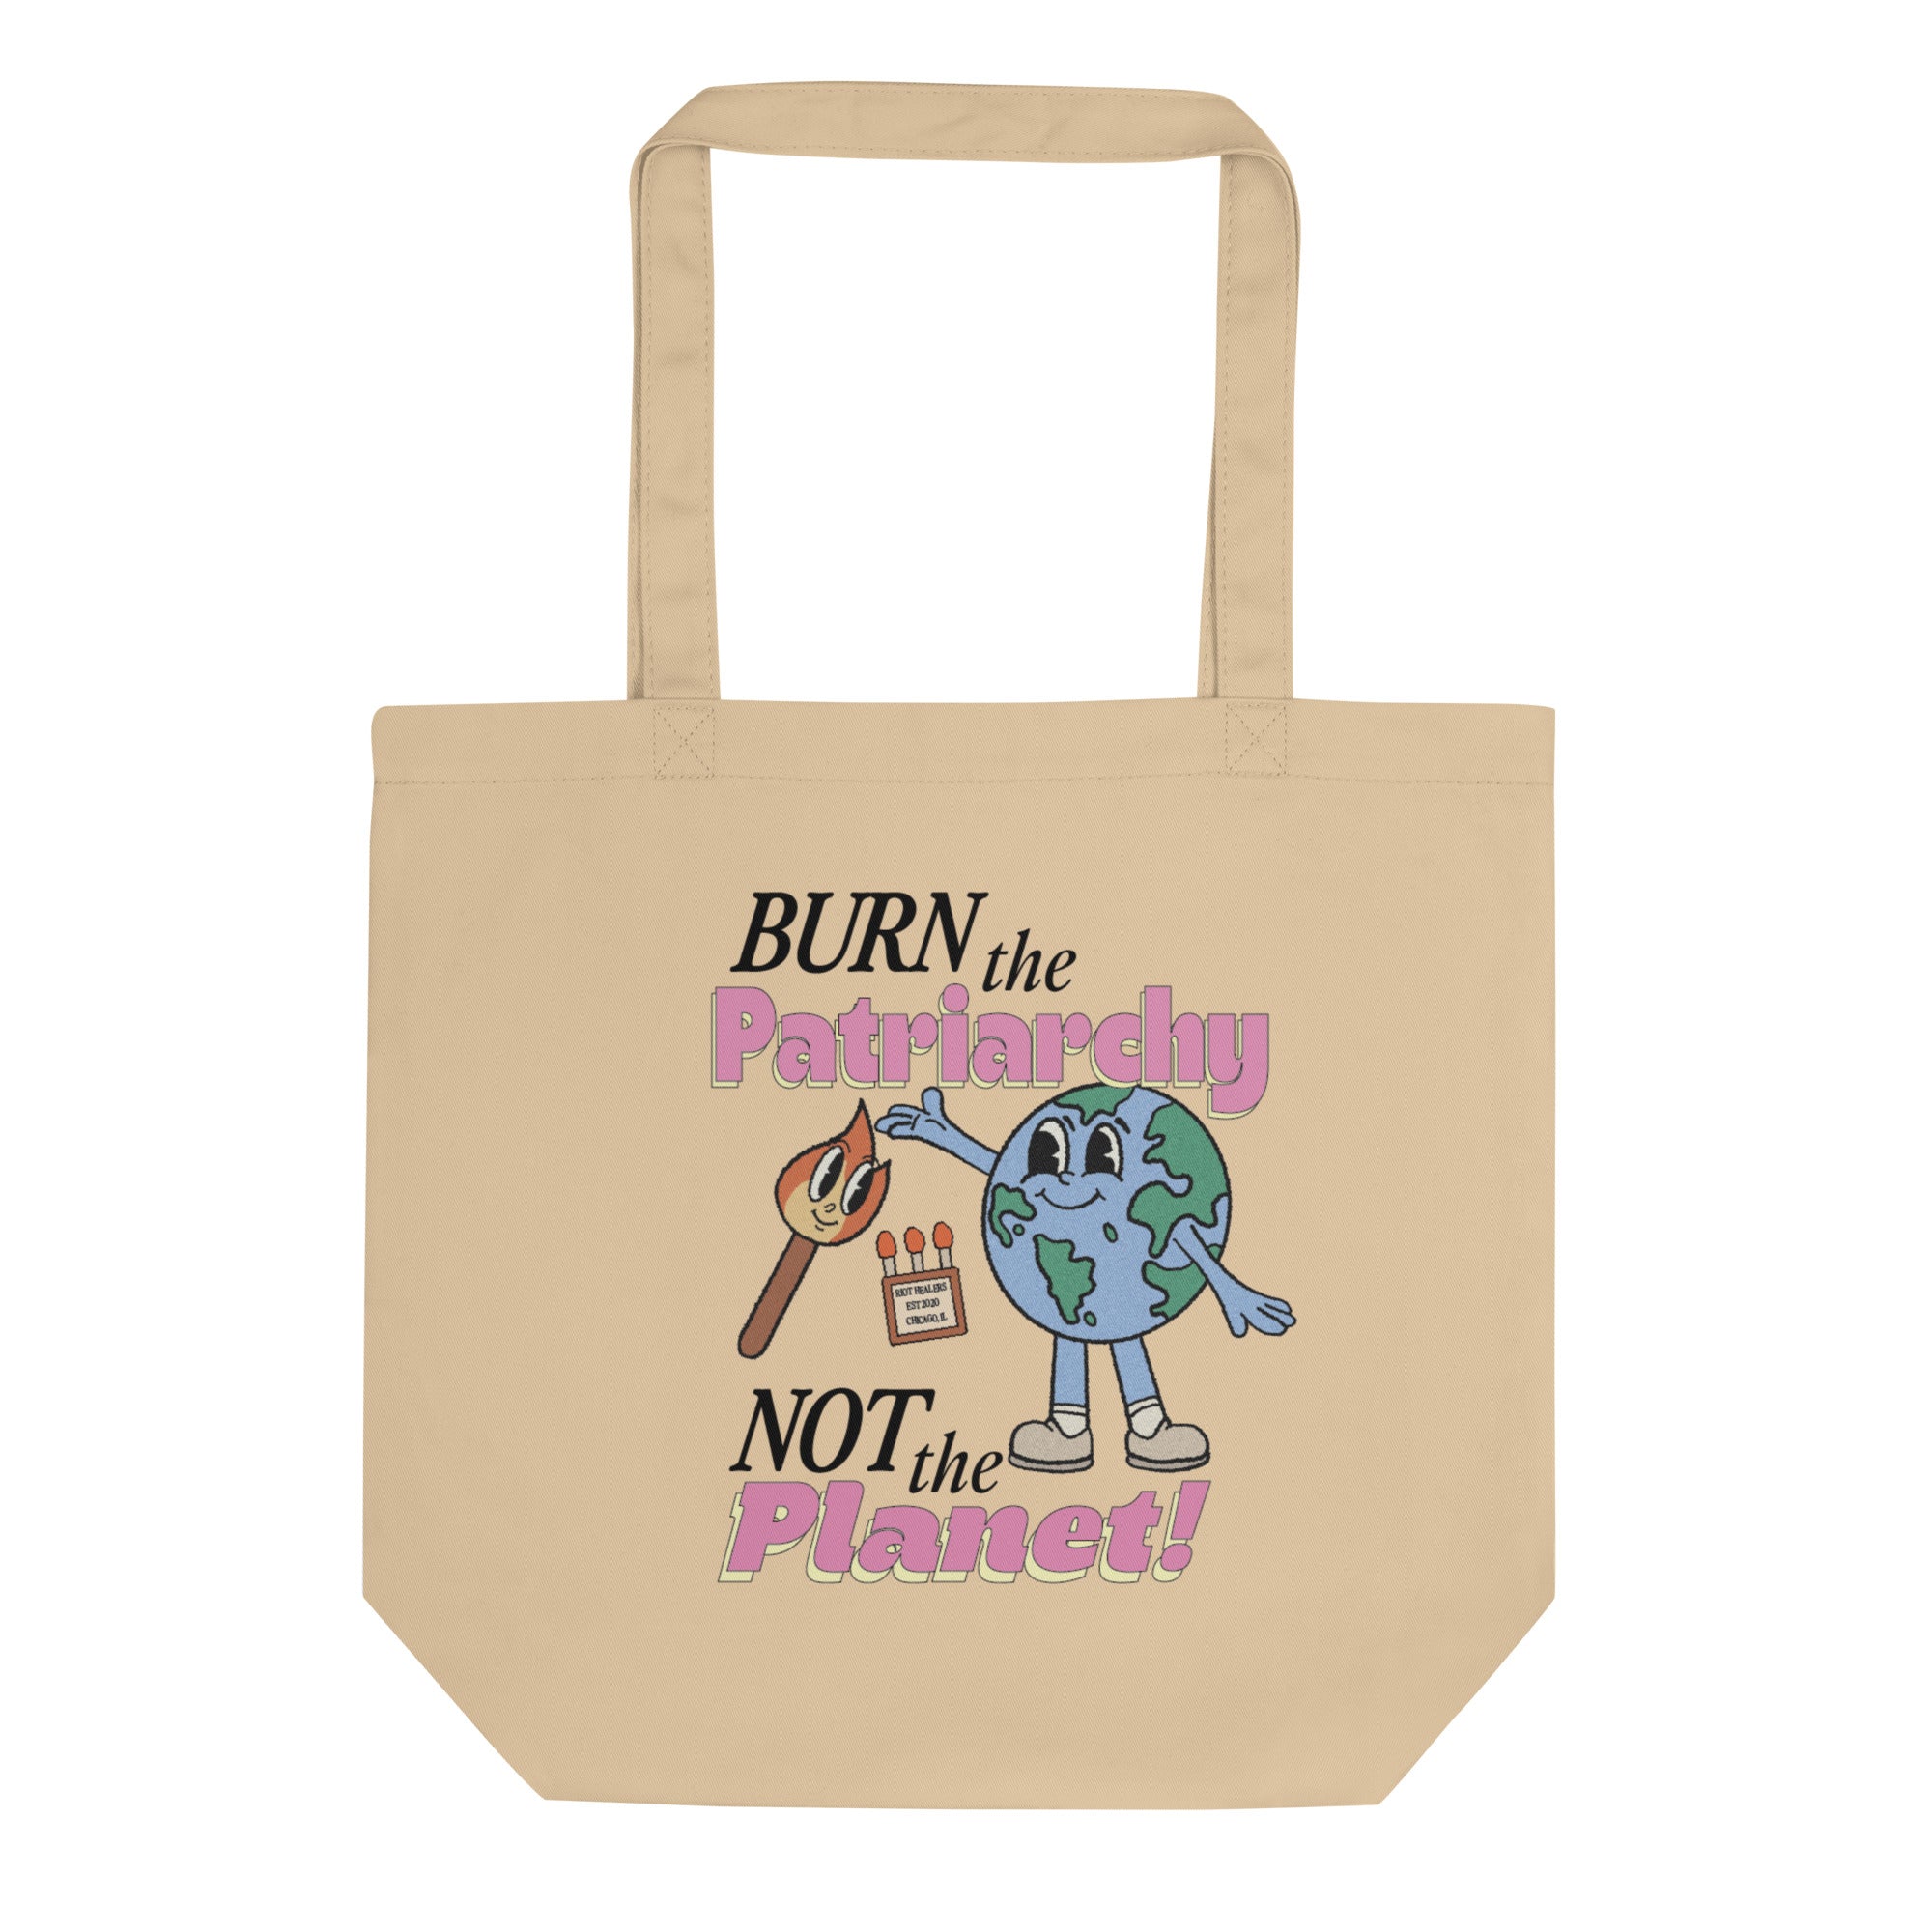 Burn the Patriarchy Not the Planet Tote